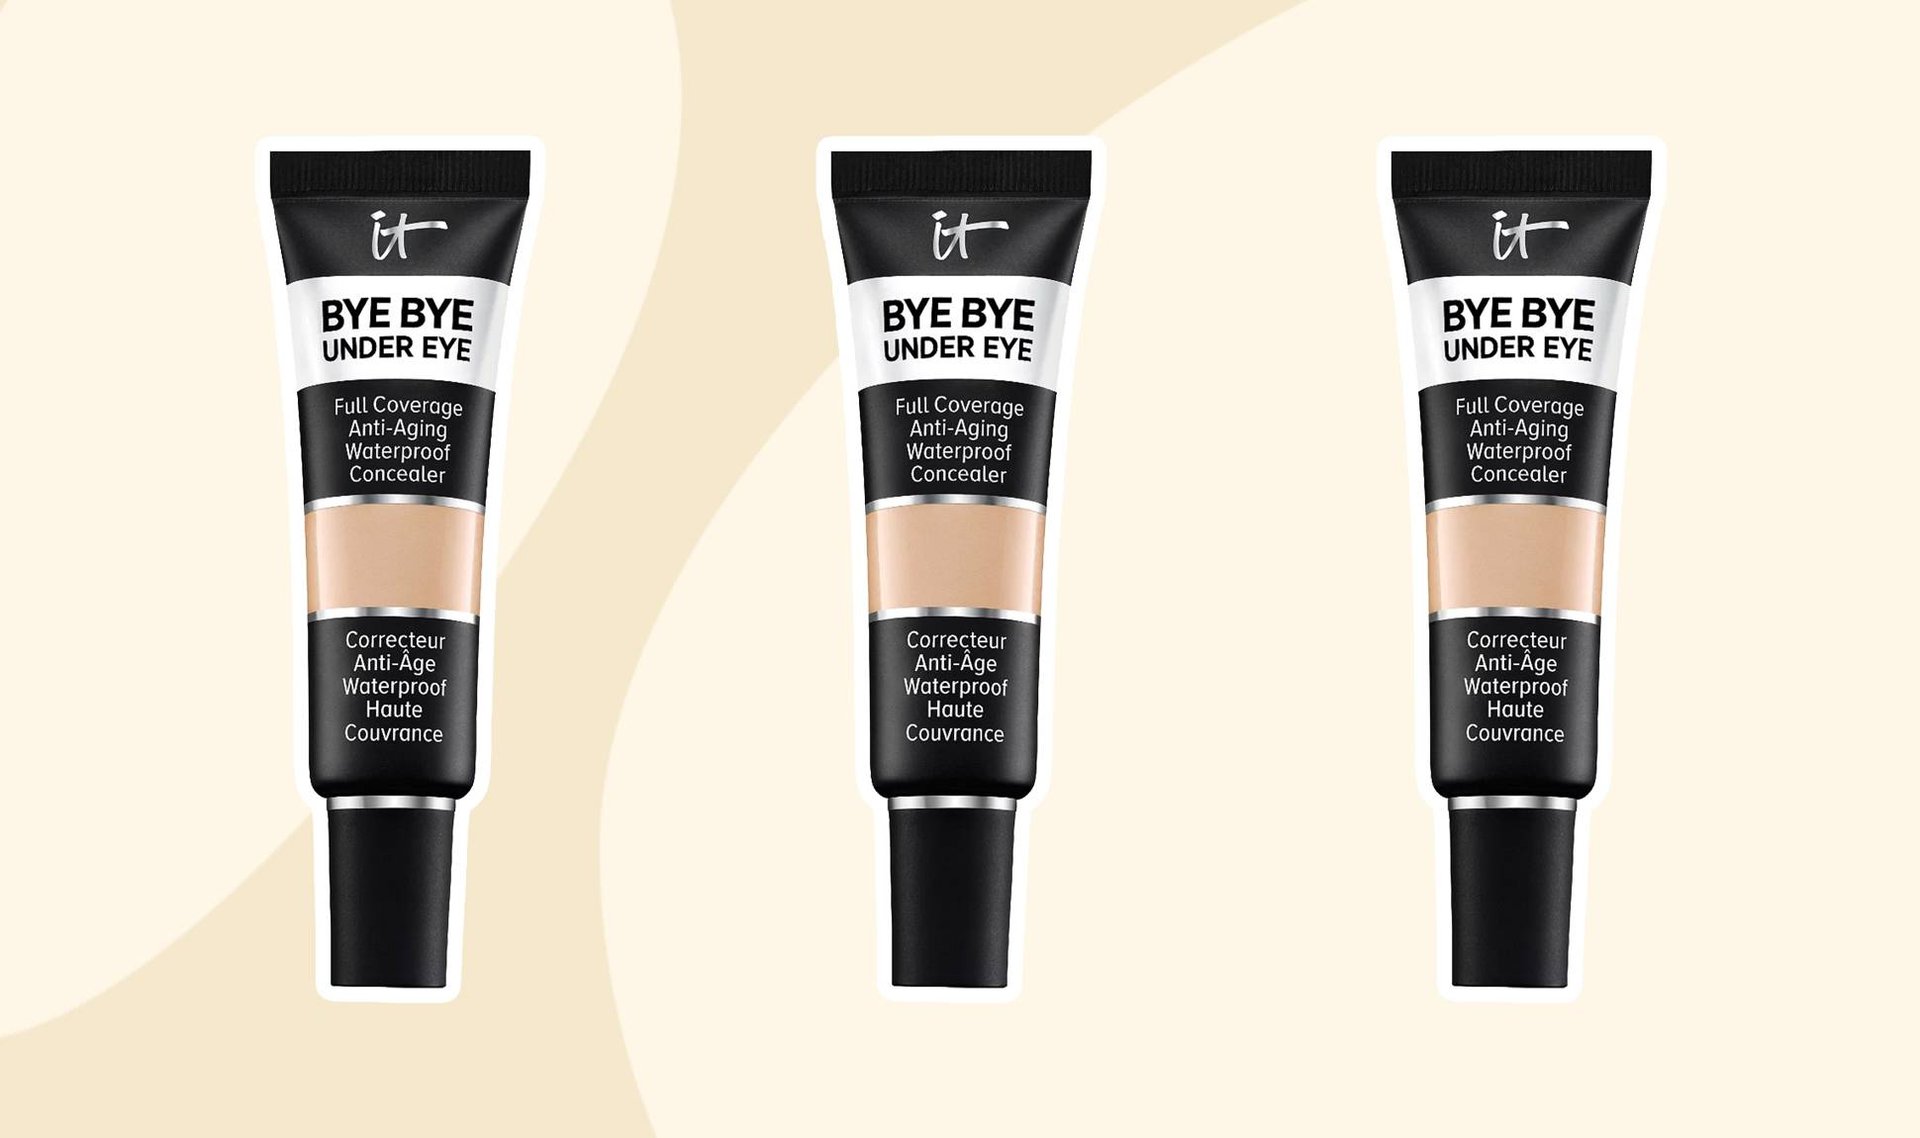 Under-Eye Bags and Dark Circles Are No Match for the IT Cosmetics Bye Bye Under-Eye Concealer